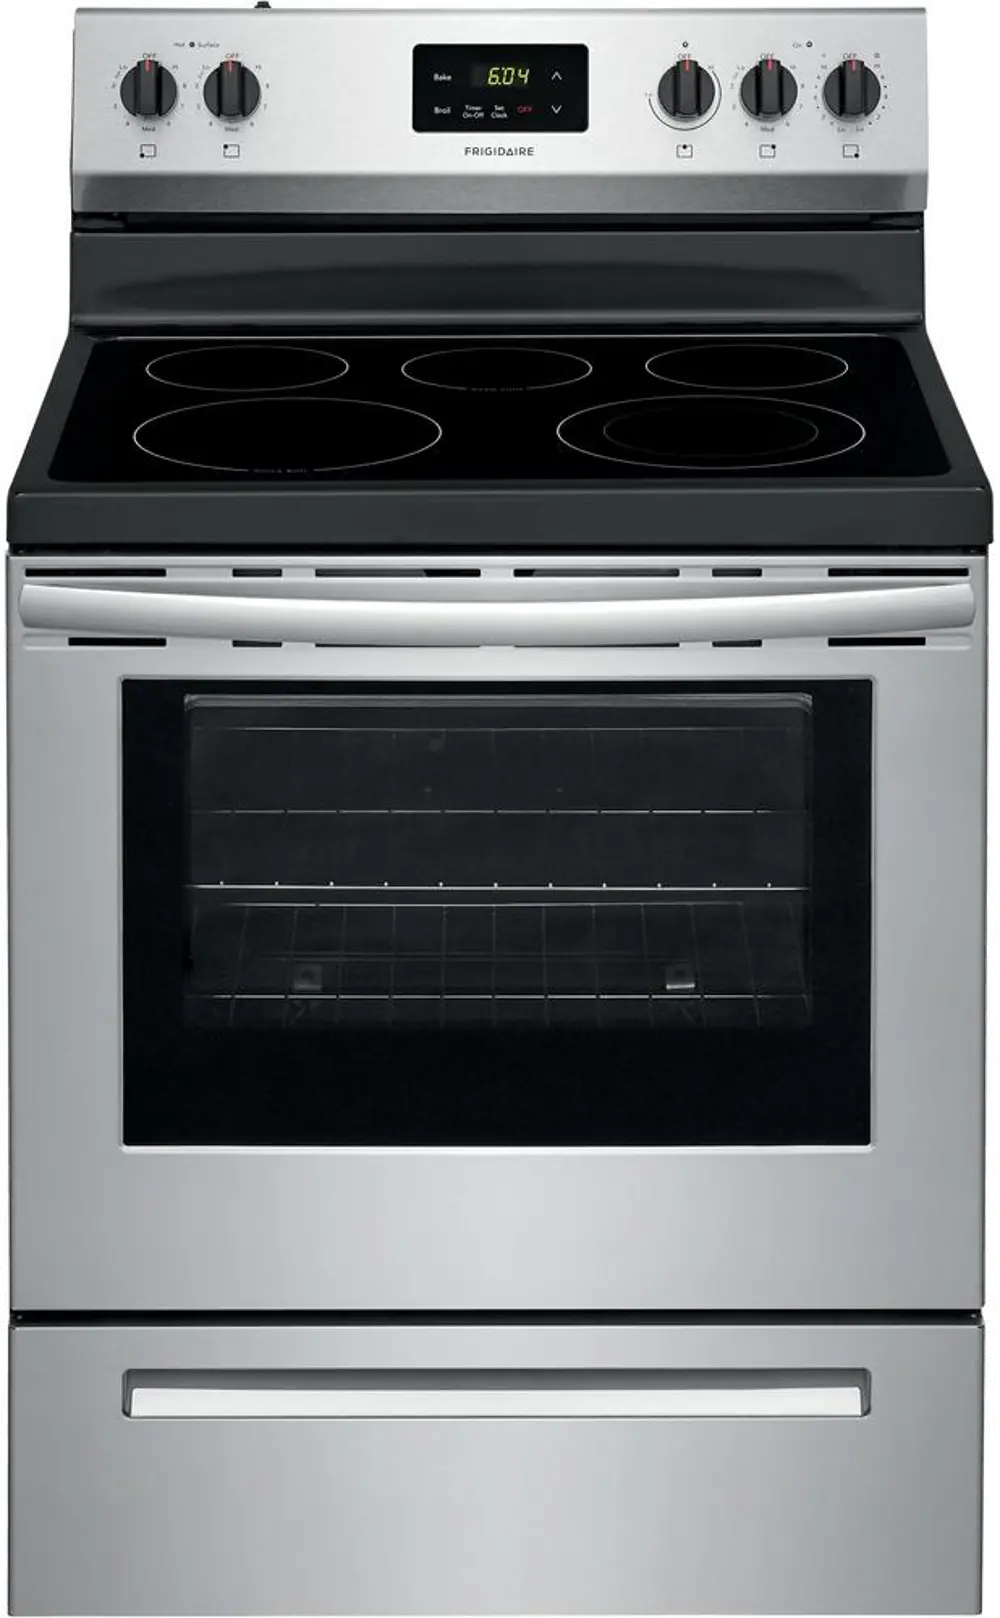 FCRE3052AS Frigidaire 5.3 cu ft Electric Range - Stainless Steel-1